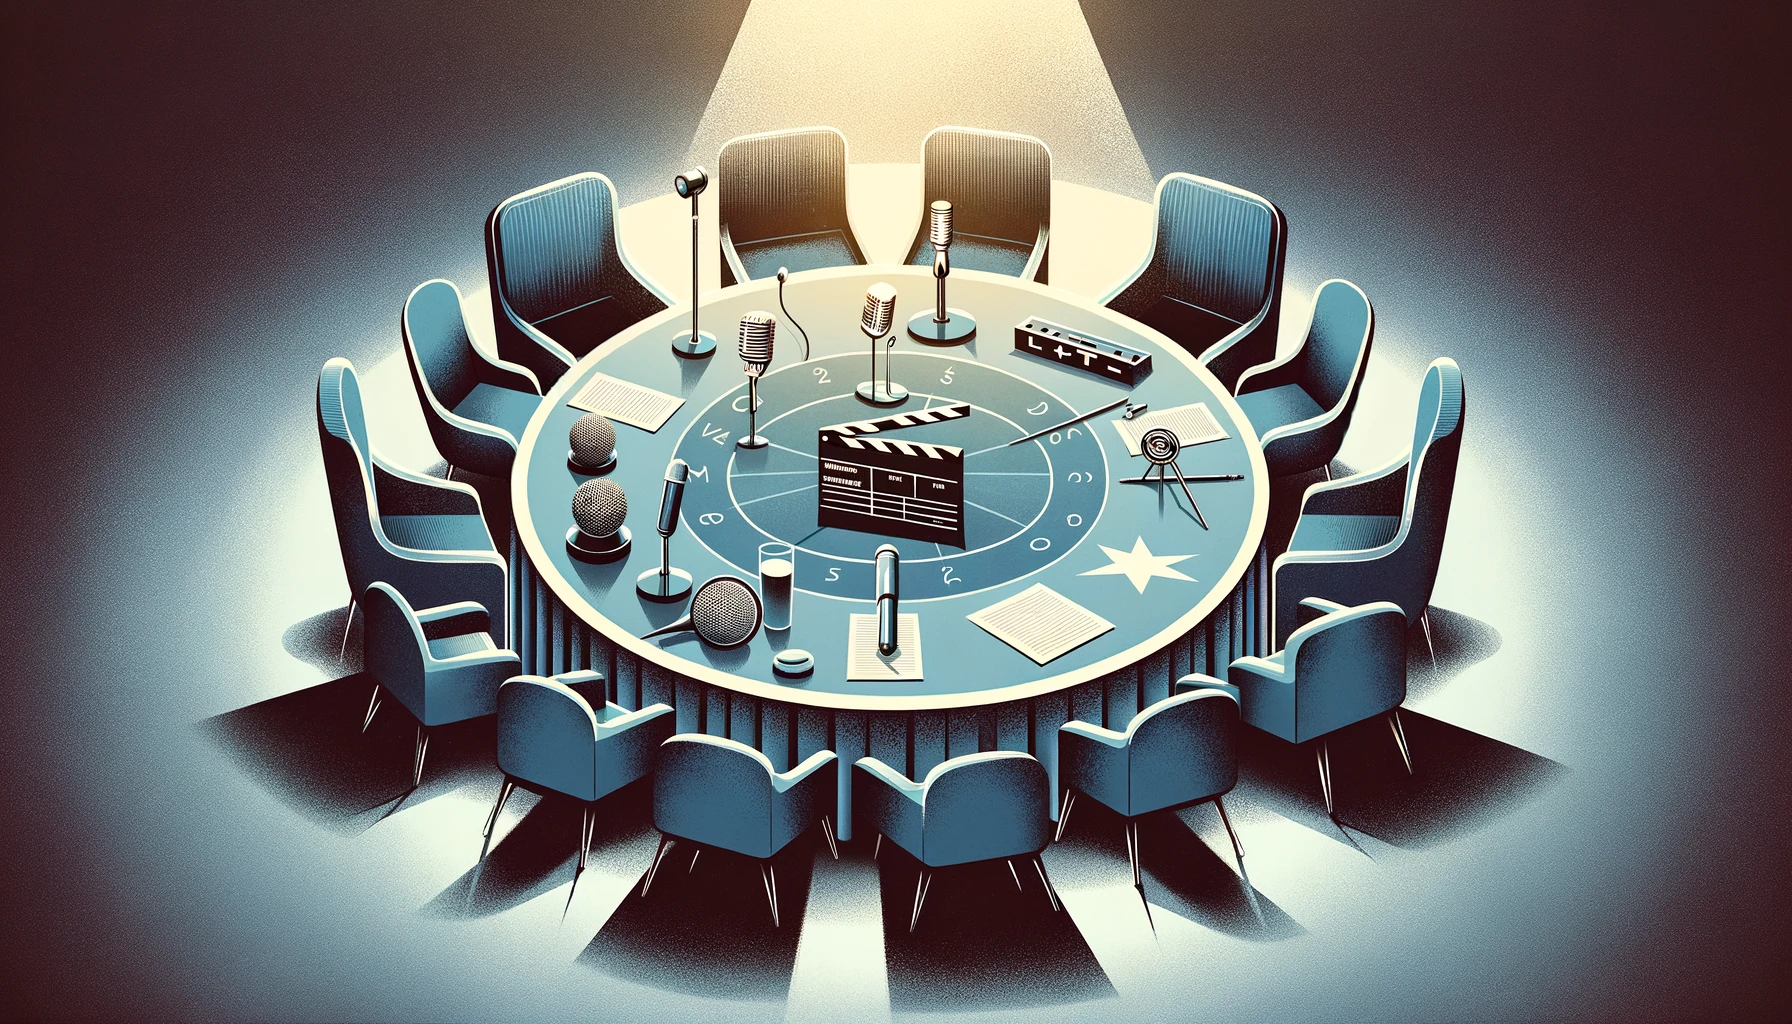 abstract image that symbolizes a negotiation table between SAG AFTRA and AMPTP